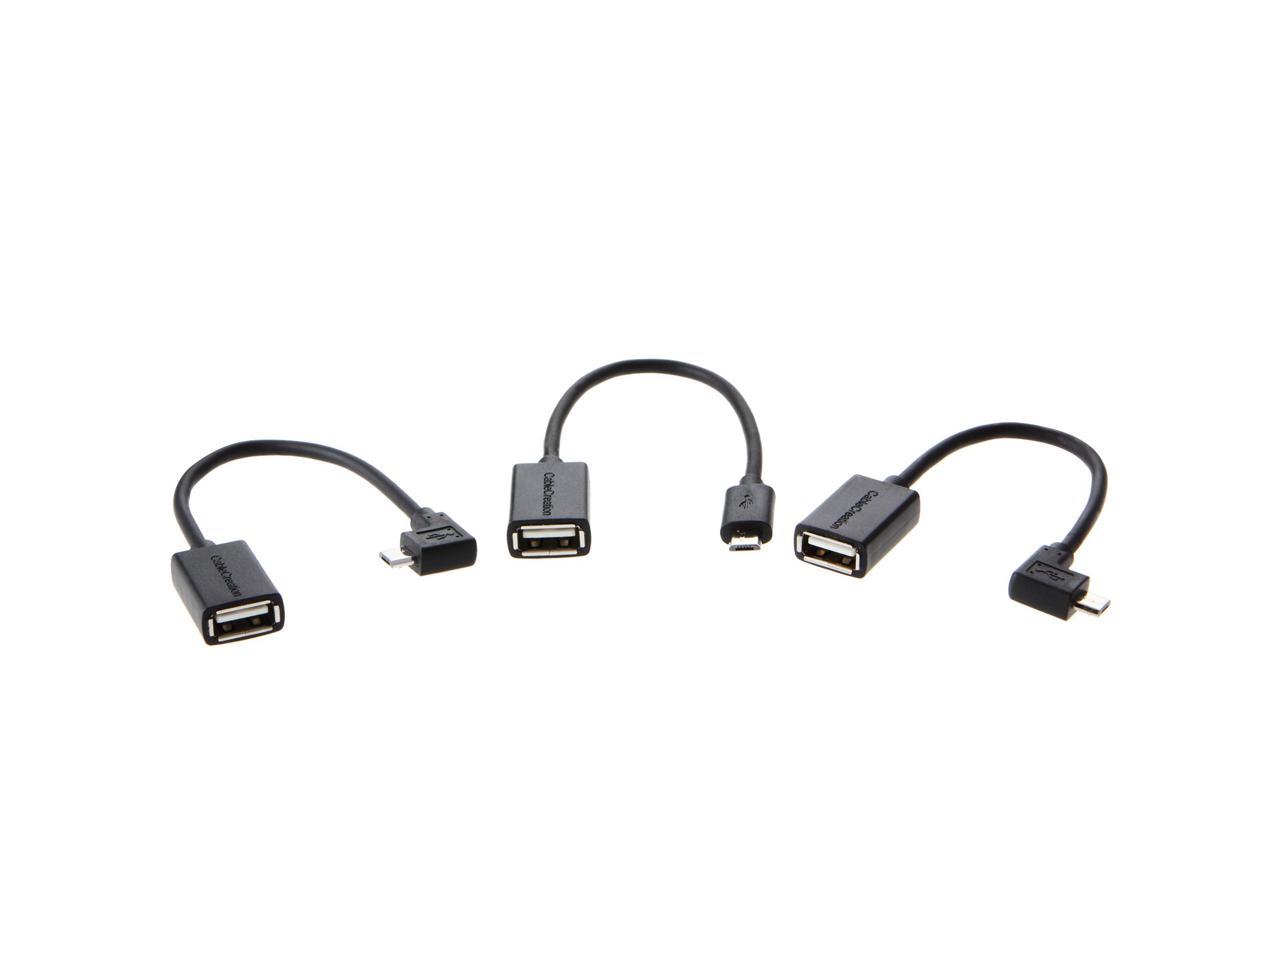 PRO OTG Power Cable Works for Sony Xperia E3 with Power Connect to Any Compatible USB Accessory with MicroUSB